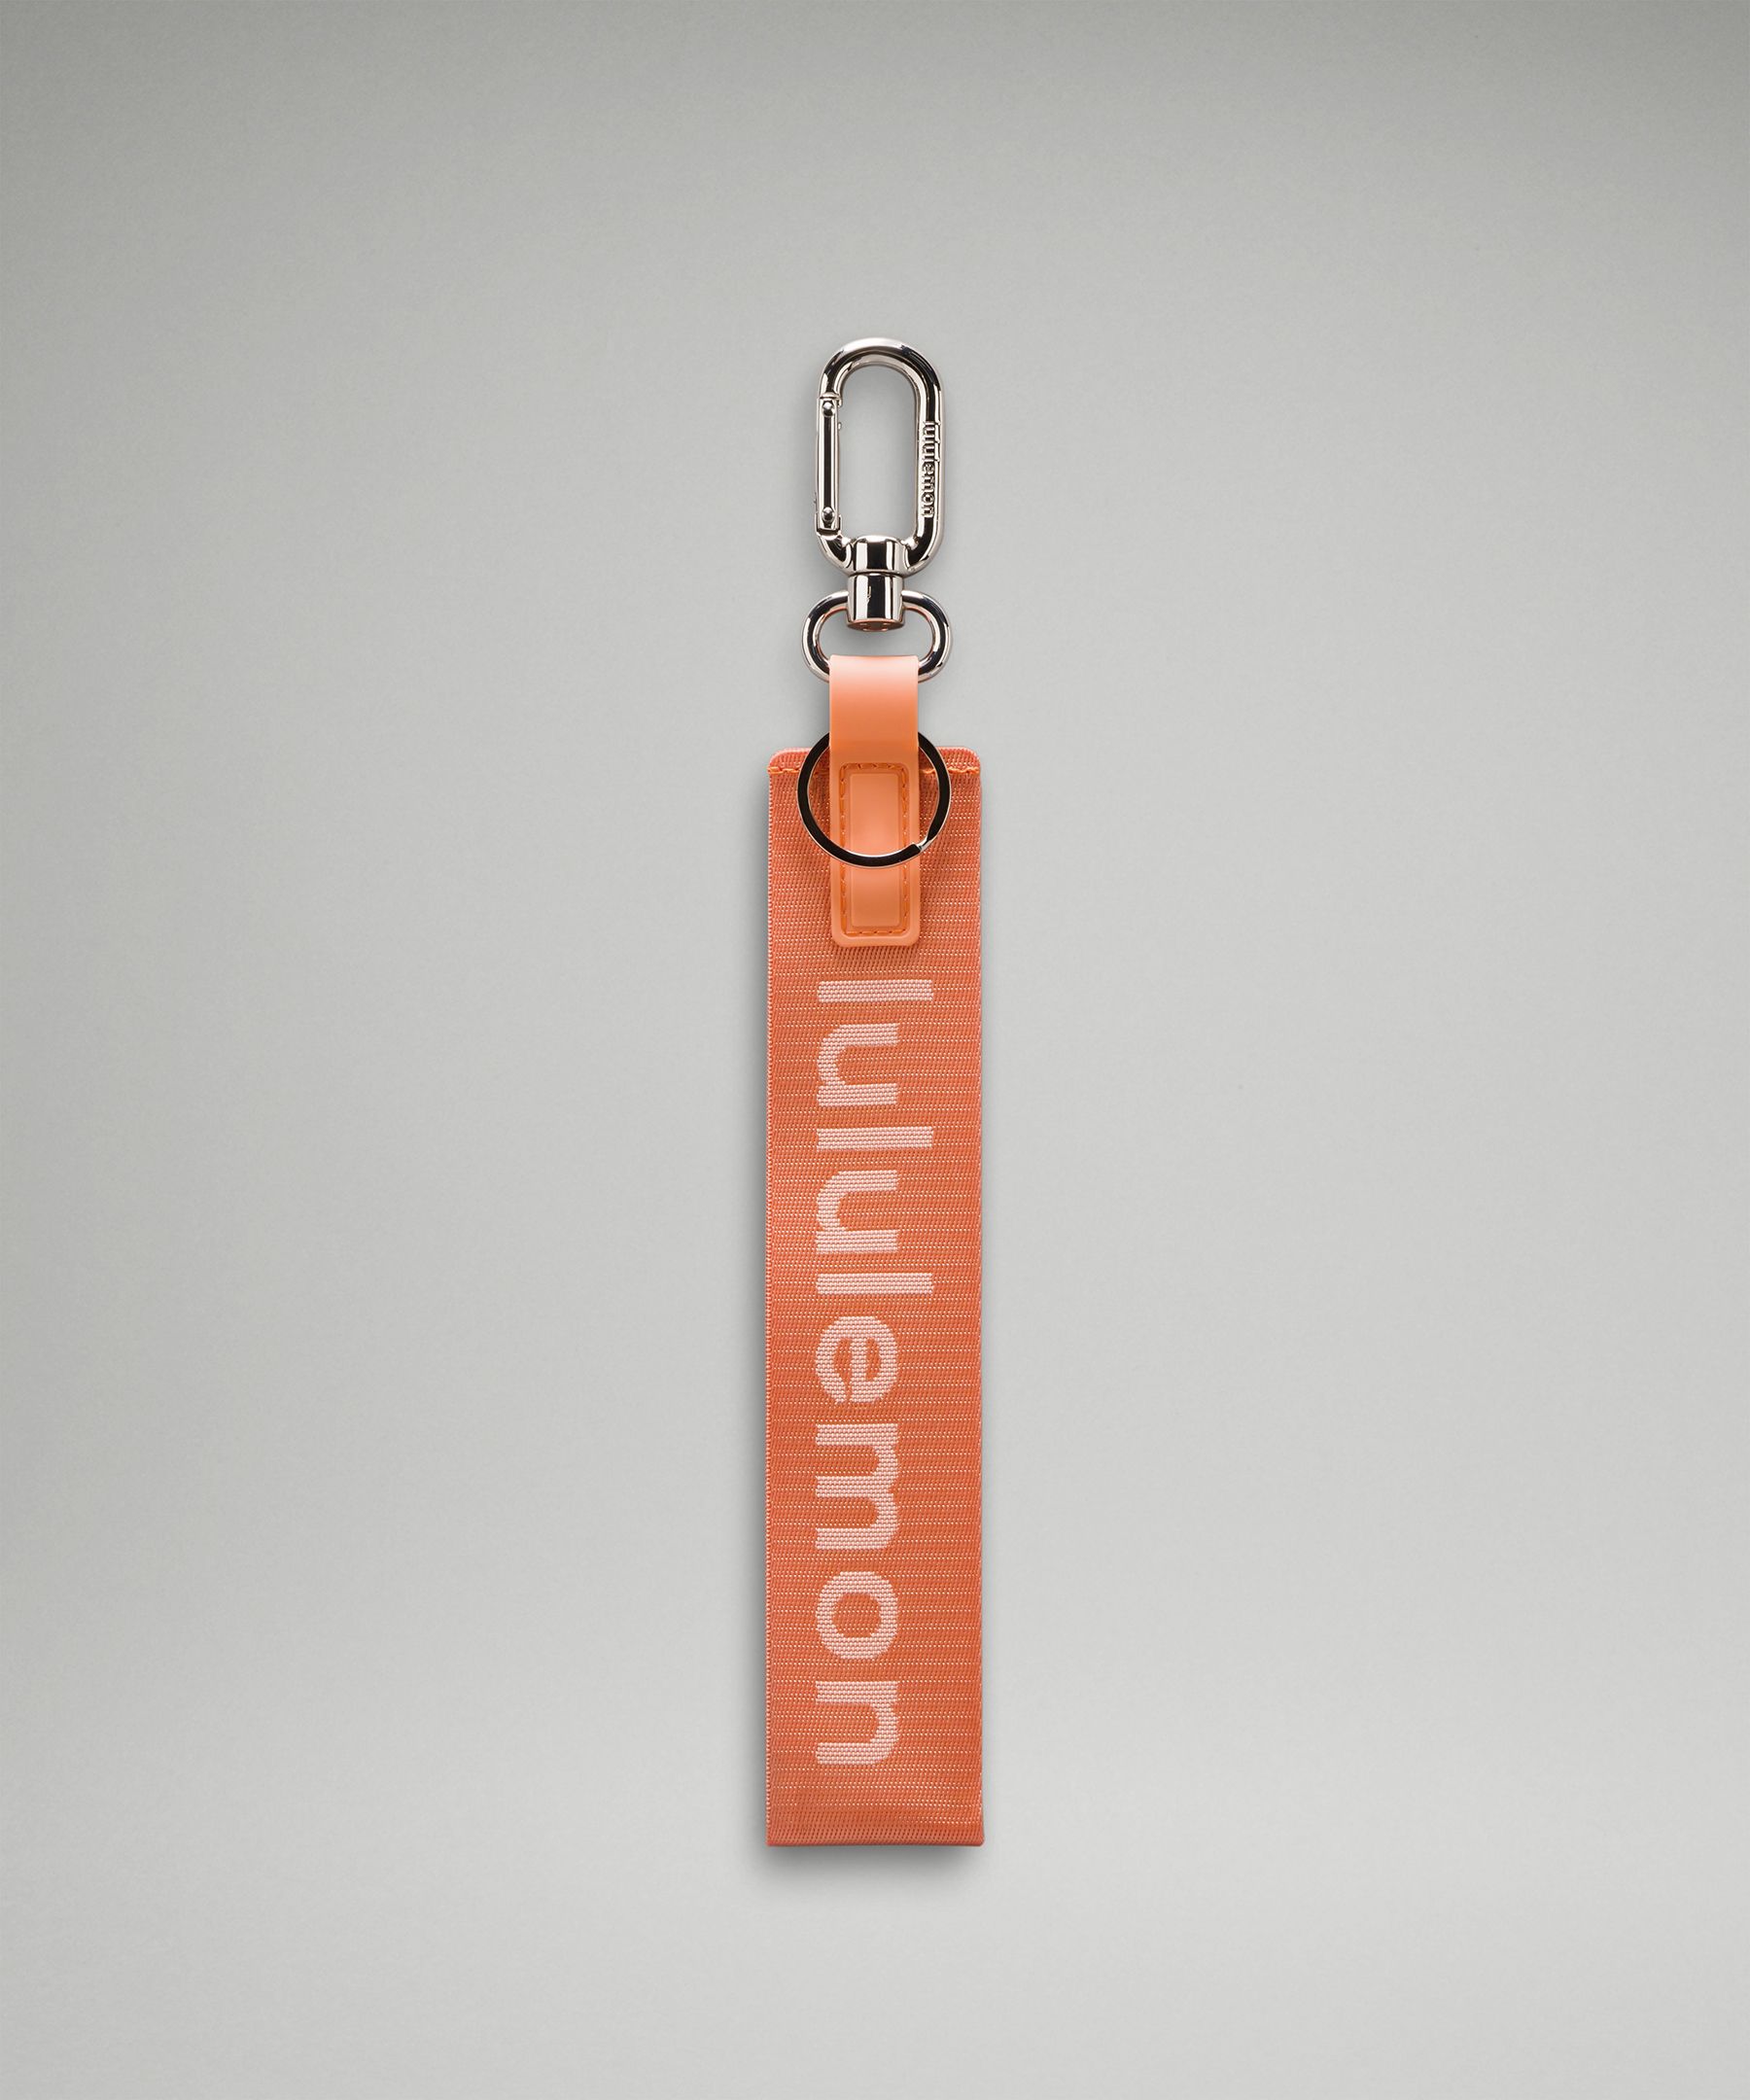 LULULEMON NEVER LOST Key Chain LOVE RED SONIC PINK NWT £21.88